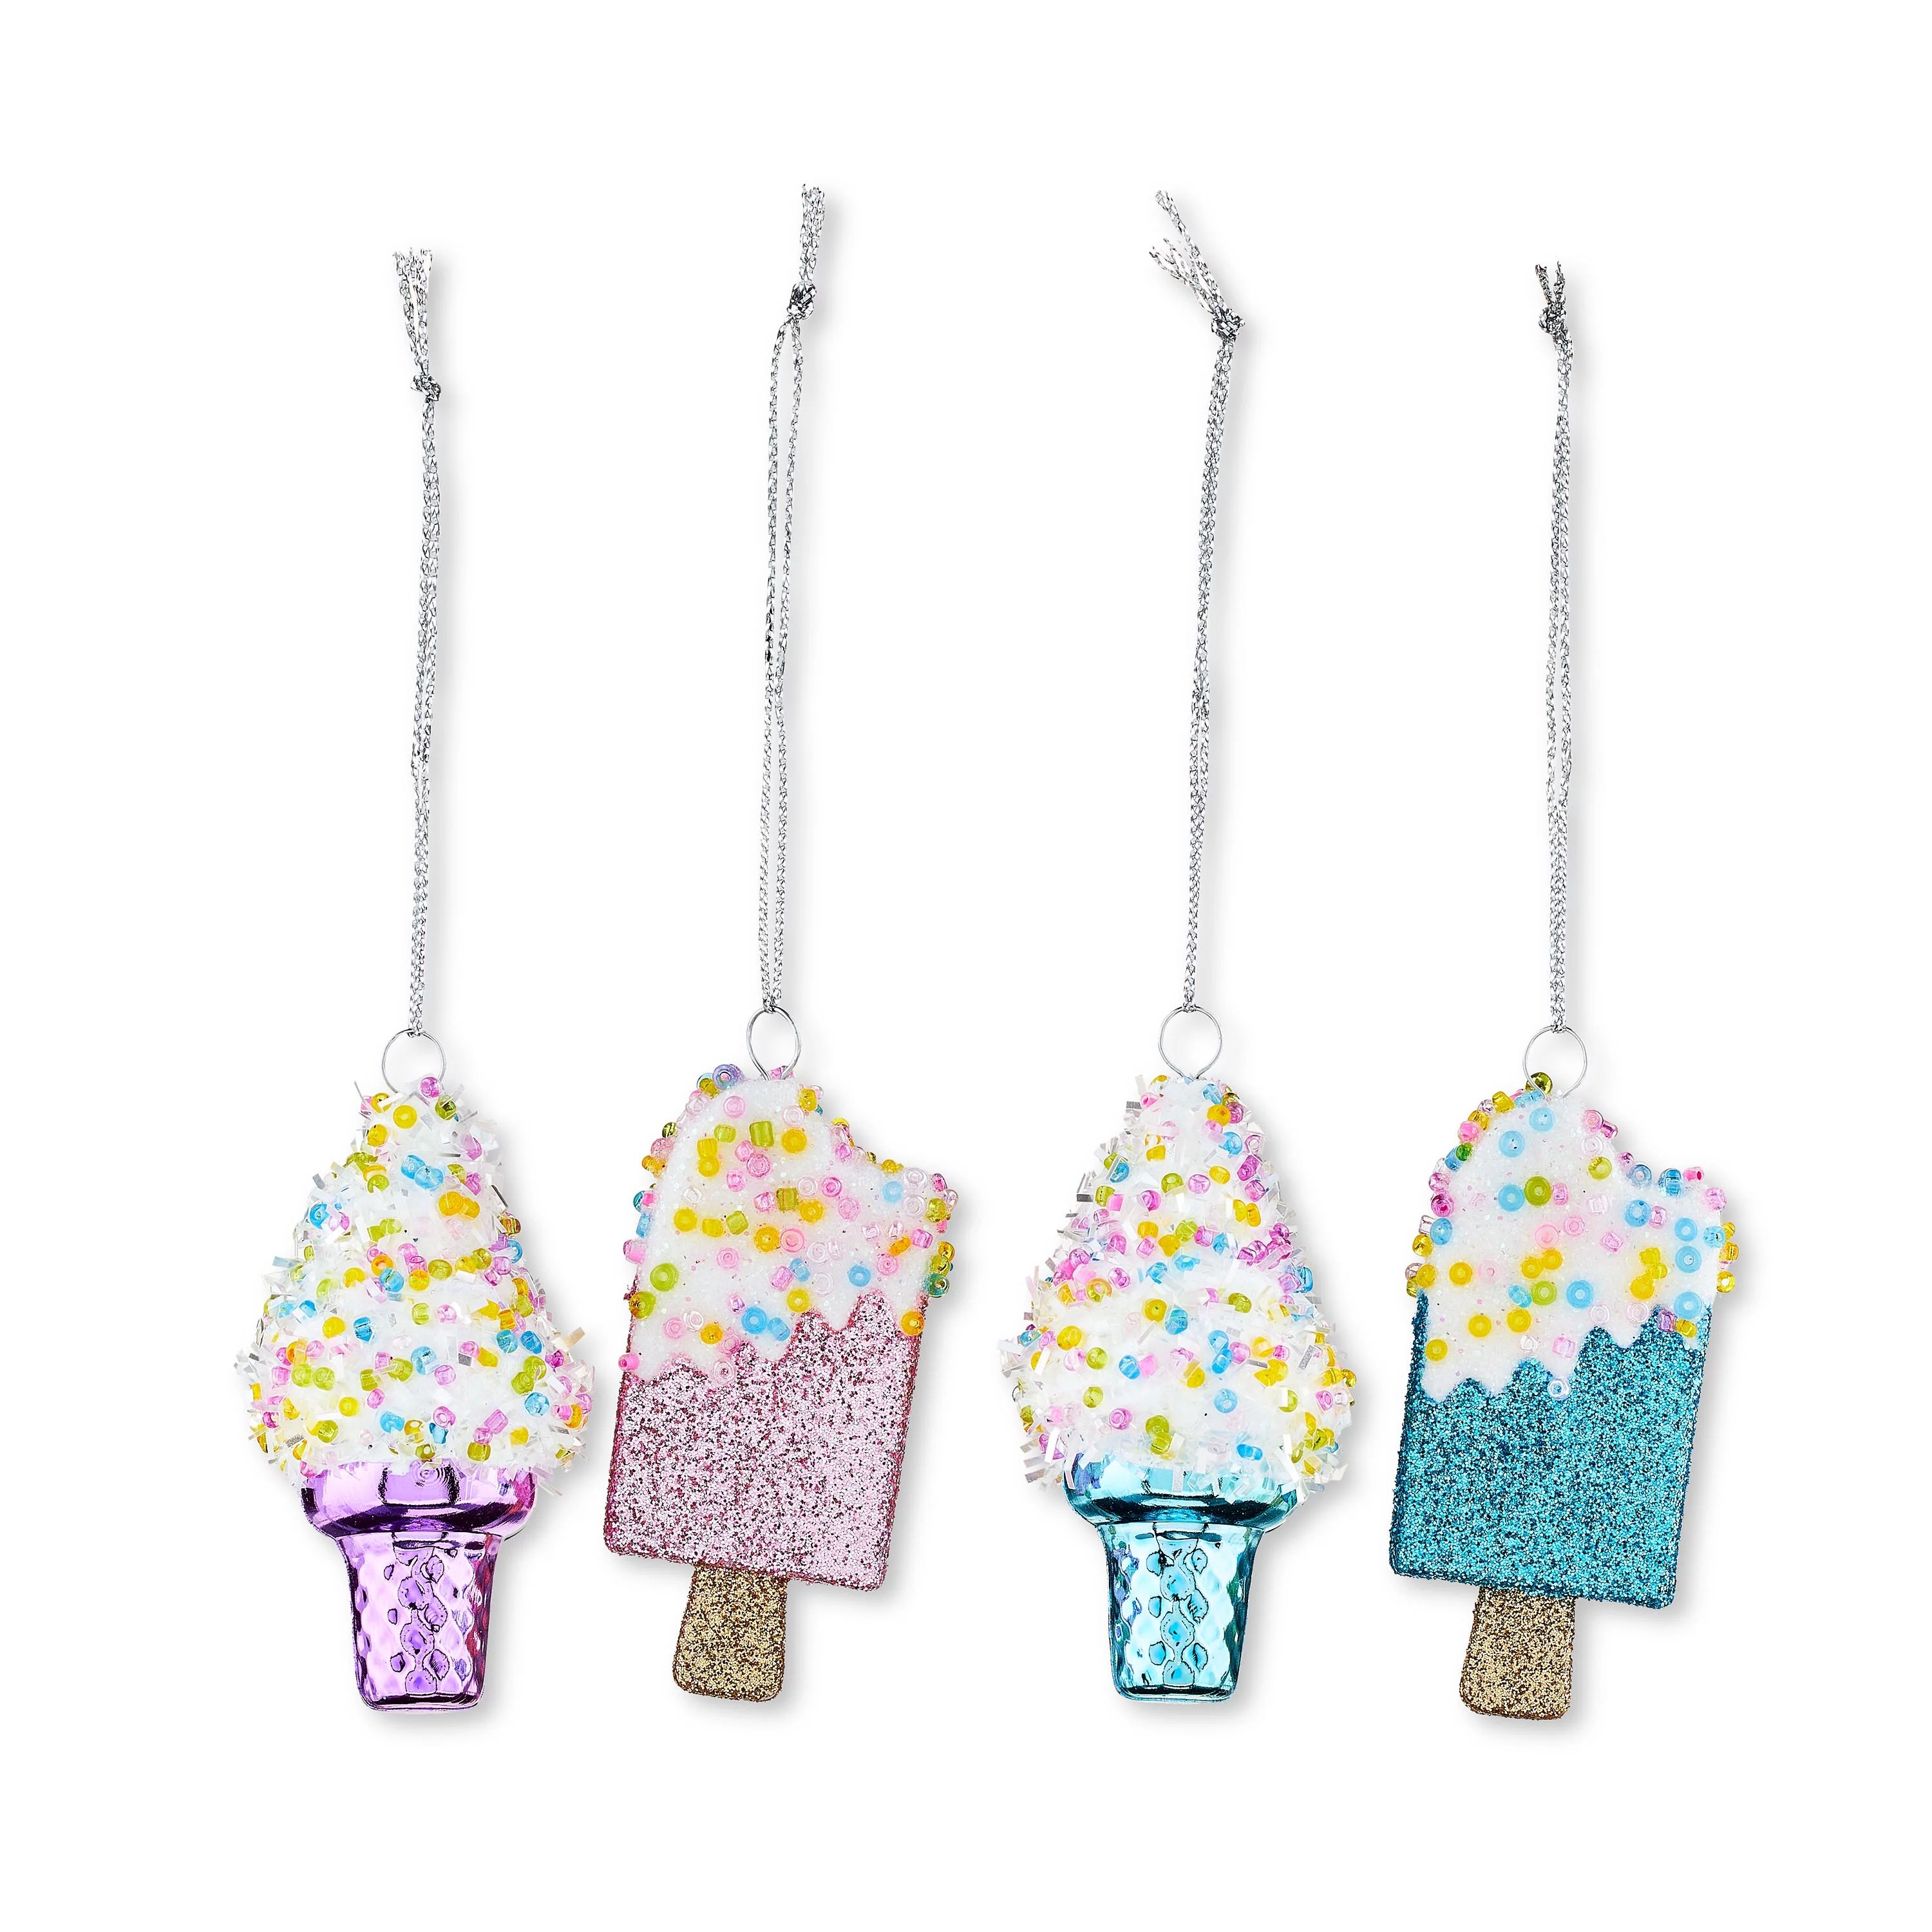 Mini Multi-Color Ice Cream & Ice Pop Christmas Ornaments, 4 Count, 0.0705 lb, by Holiday Time | Walmart (US)